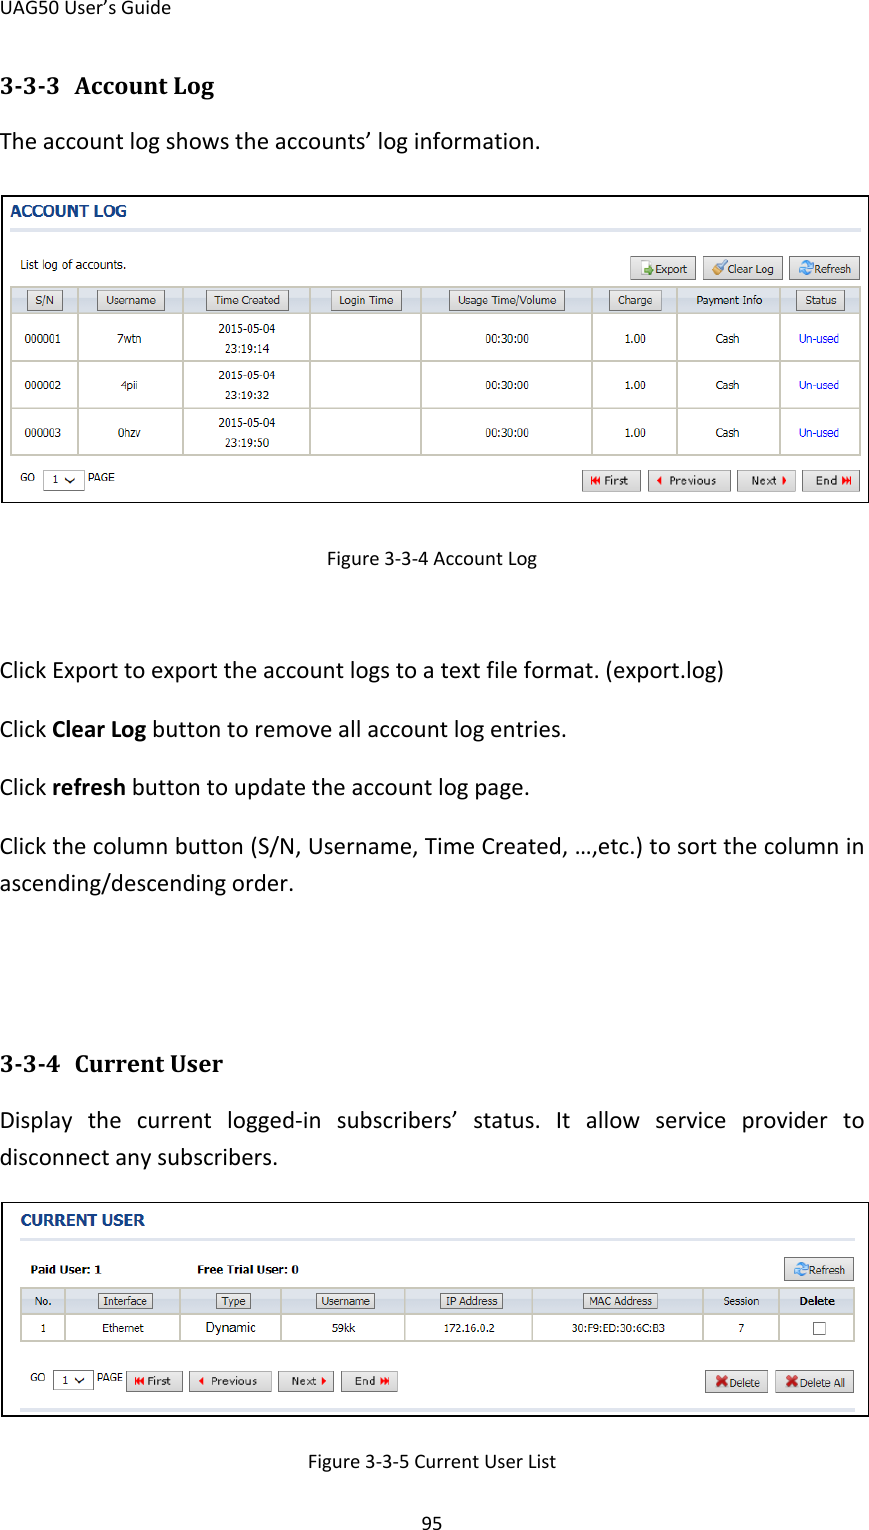 UAG50 User’s Guide 95 3-3-3 Account Log The account log shows the accounts’ log information.  Figure 3-3-4 Account Log  Click Export to export the account logs to a text file format. (export.log) Click Clear Log button to remove all account log entries. Click refresh button to update the account log page. Click the column button (S/N, Username, Time Created, …,etc.) to sort the column in ascending/descending order.   3-3-4 Current User Display the current logged-in subscribers’ status. It allow service provider to disconnect any subscribers.  Figure 3-3-5 Current User List 